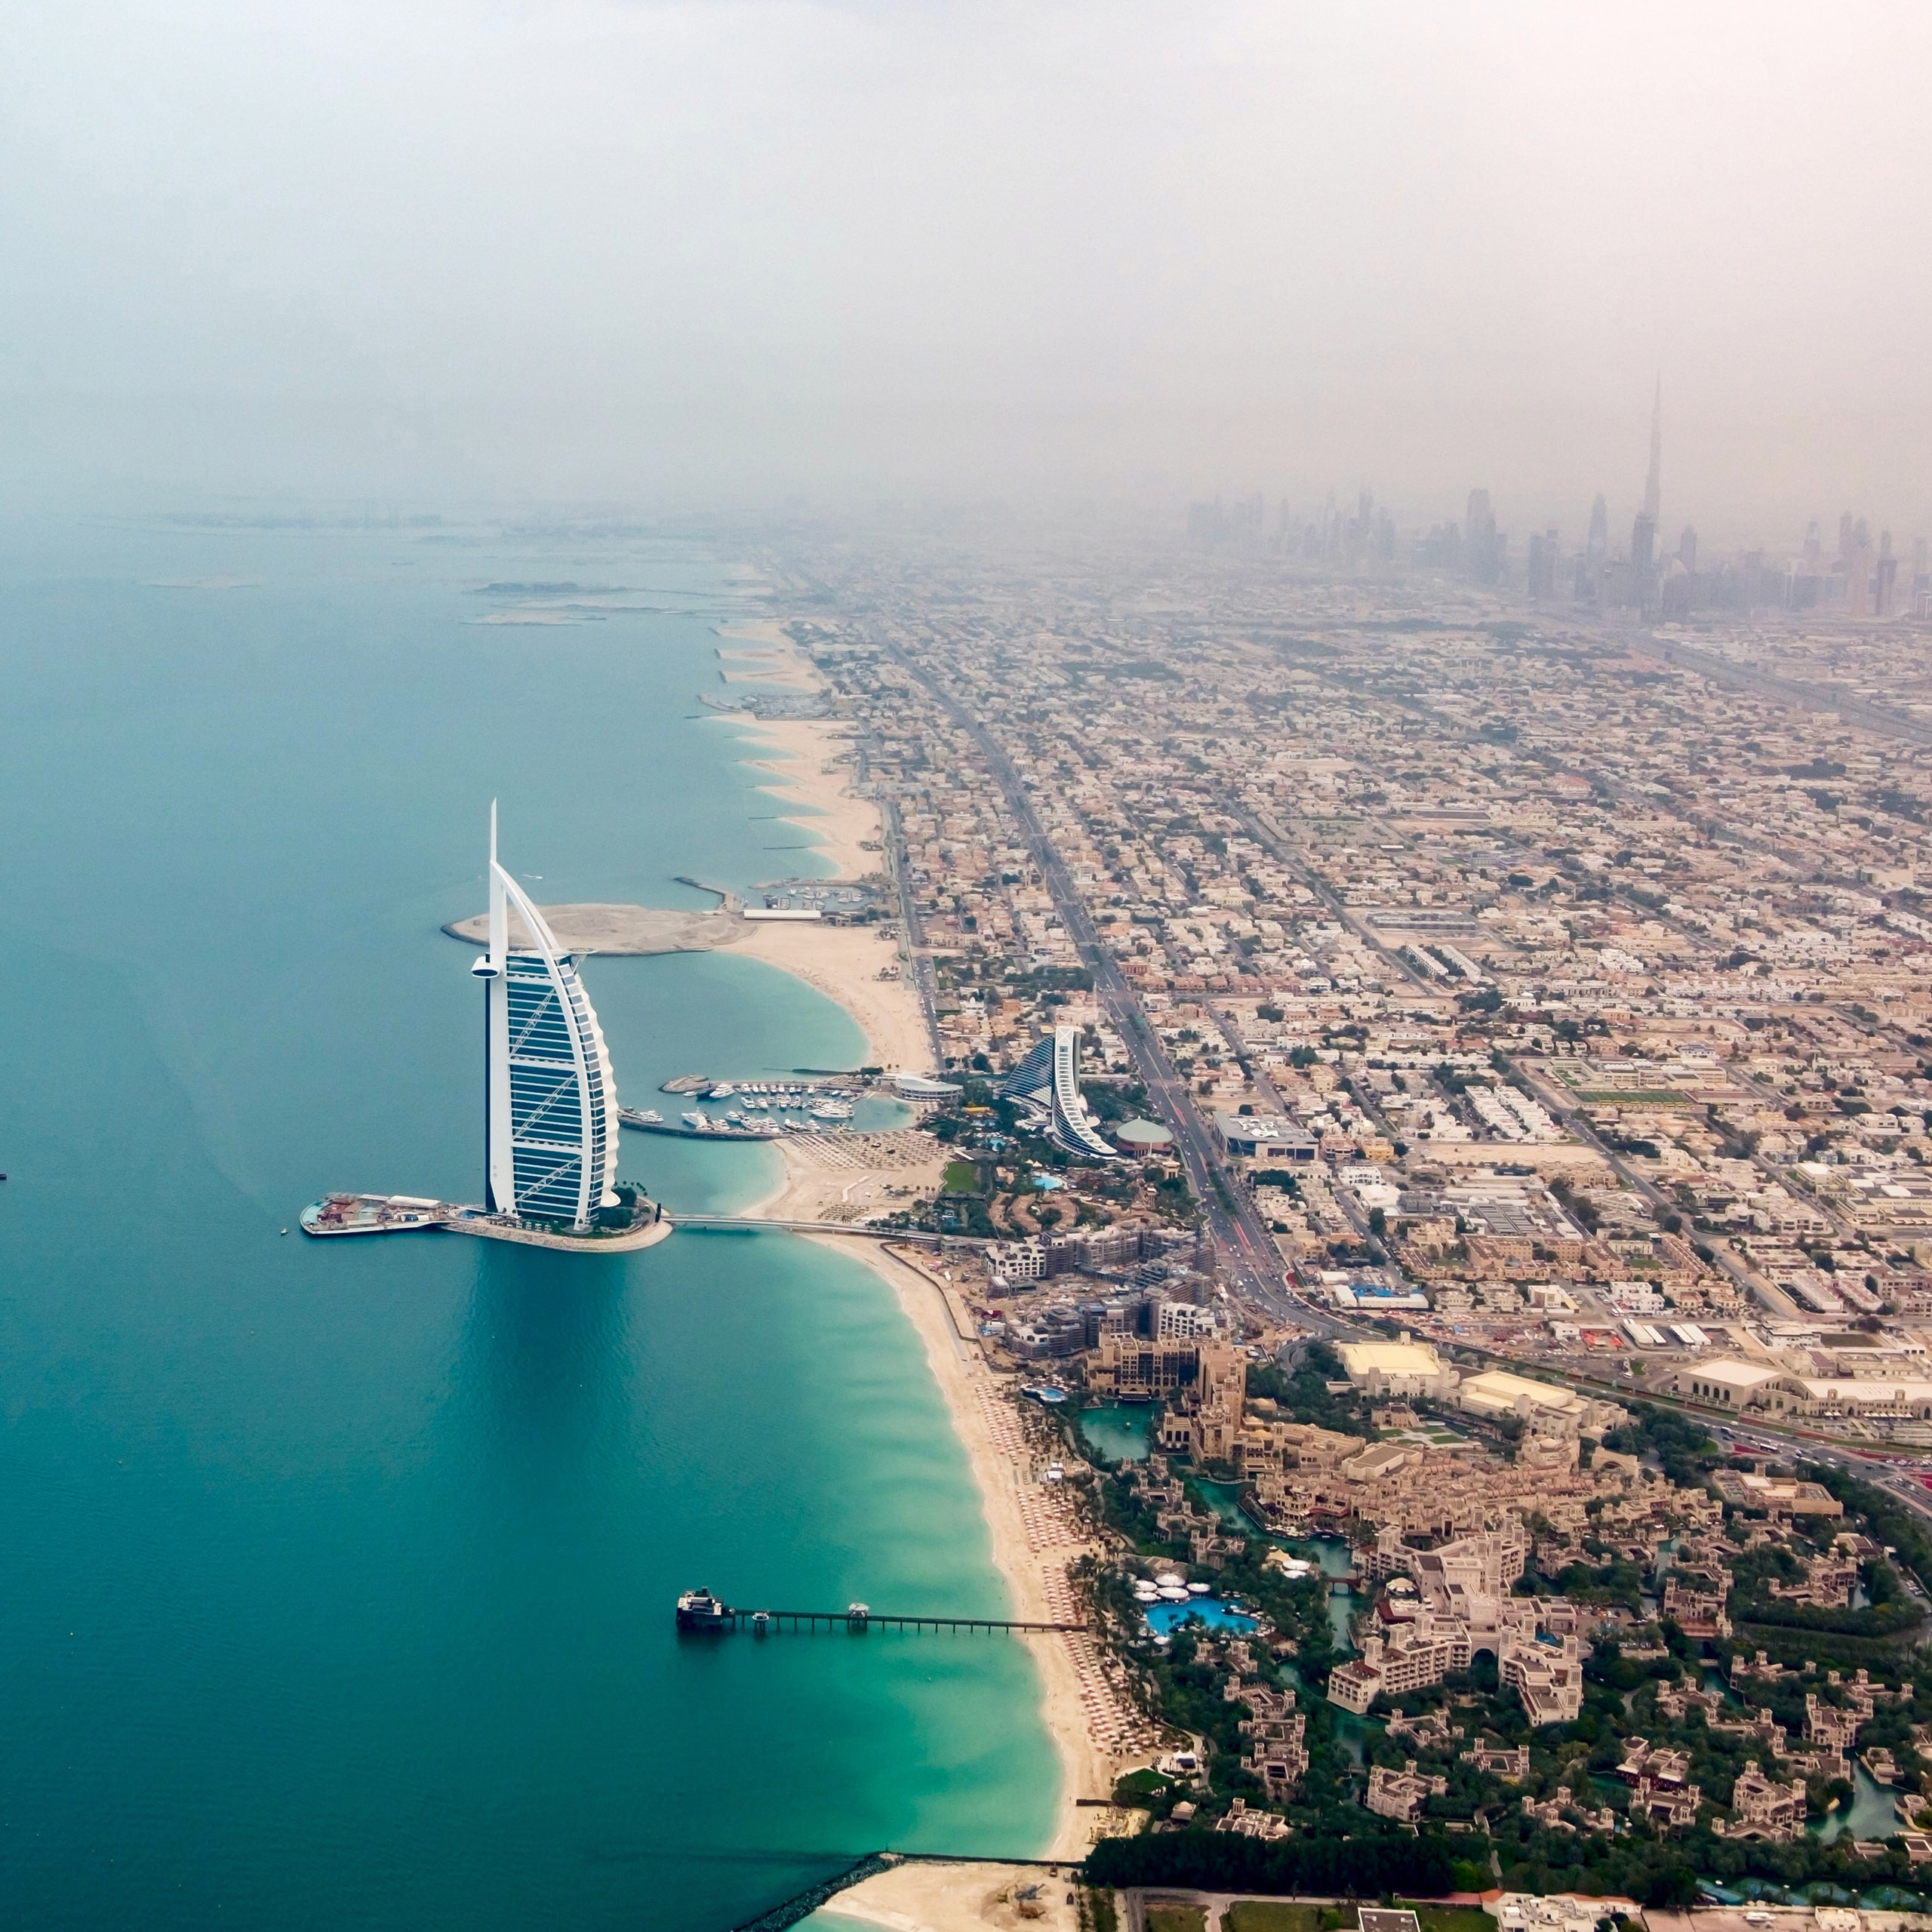 Paperworld Middle East Industry News - Dubai is open, safest city in the world: Top officials